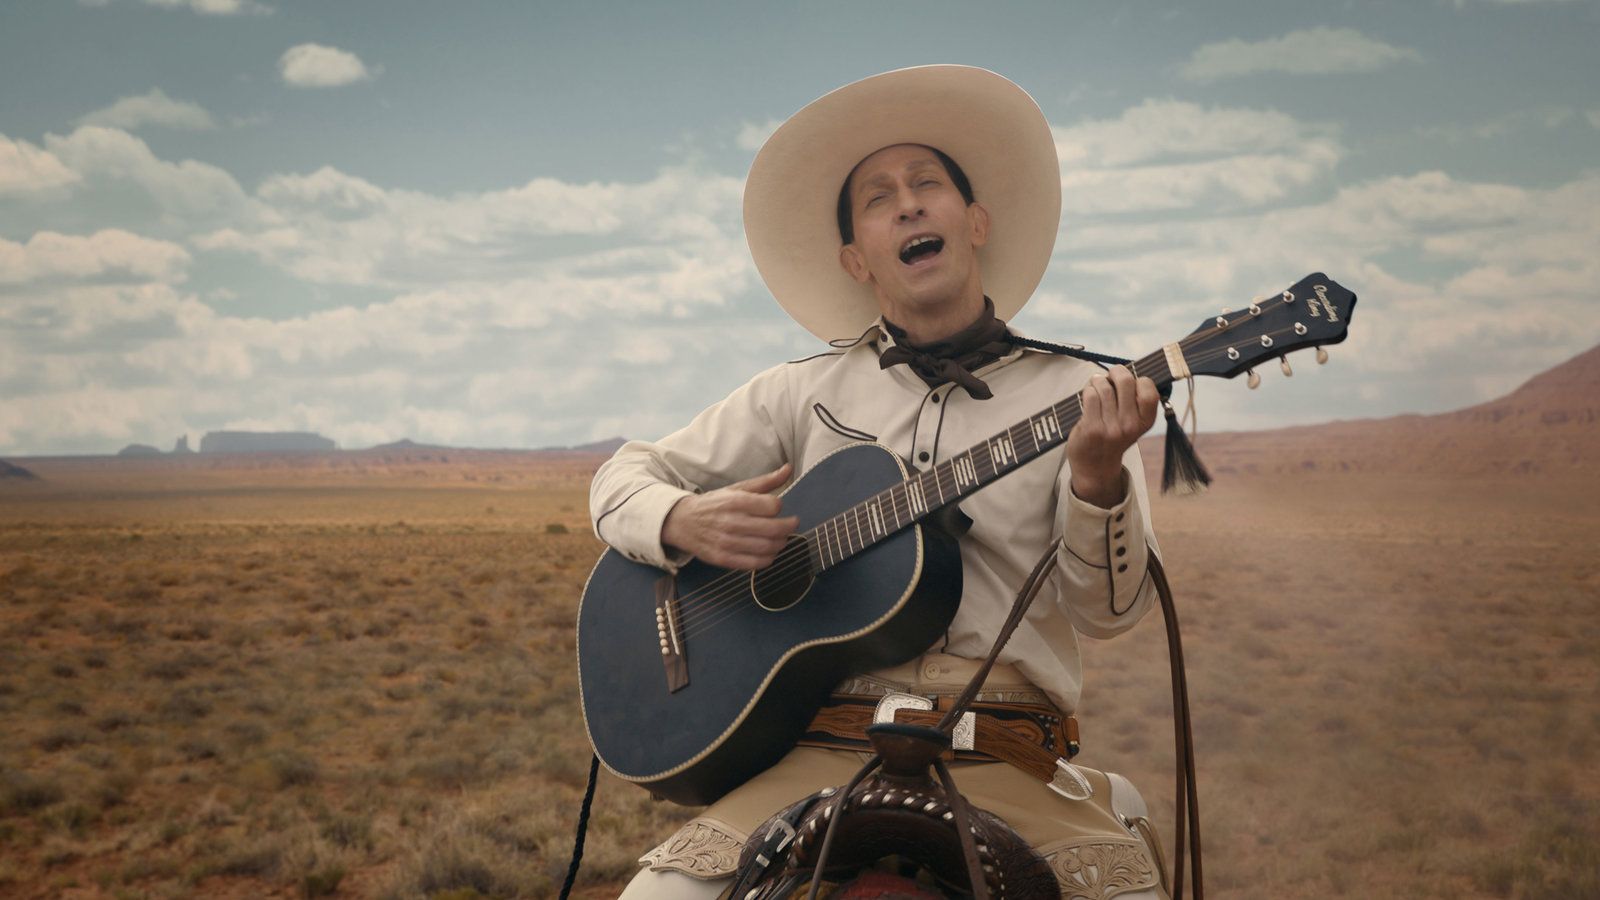 The Ballad of Buster Scruggs' Review: A Grim Western From the Coen